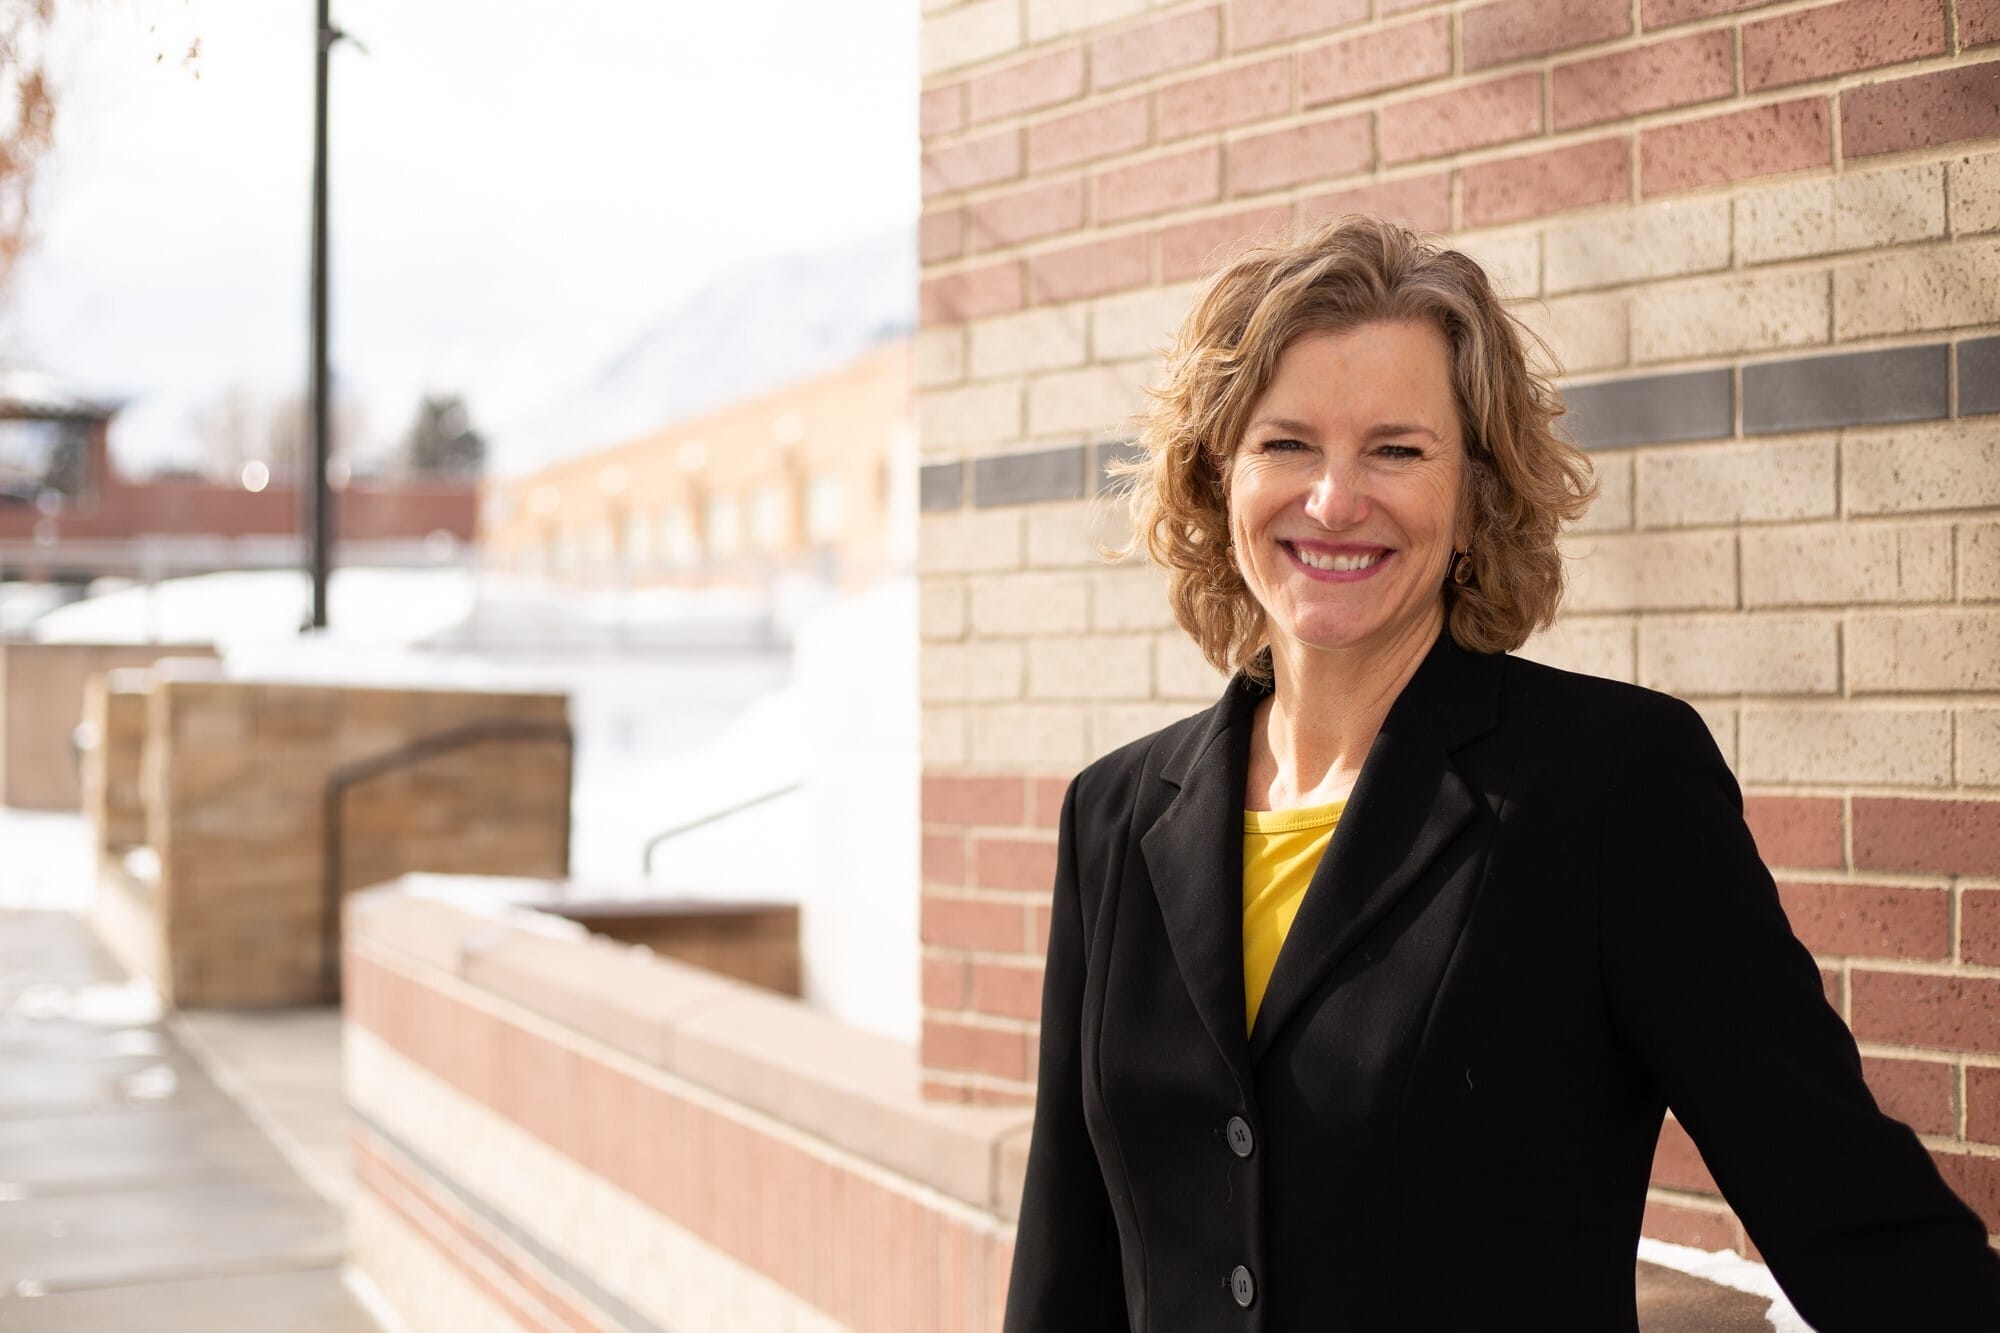 Dr. Carrie Besnette Hauser, TPL’s incoming President and CEO